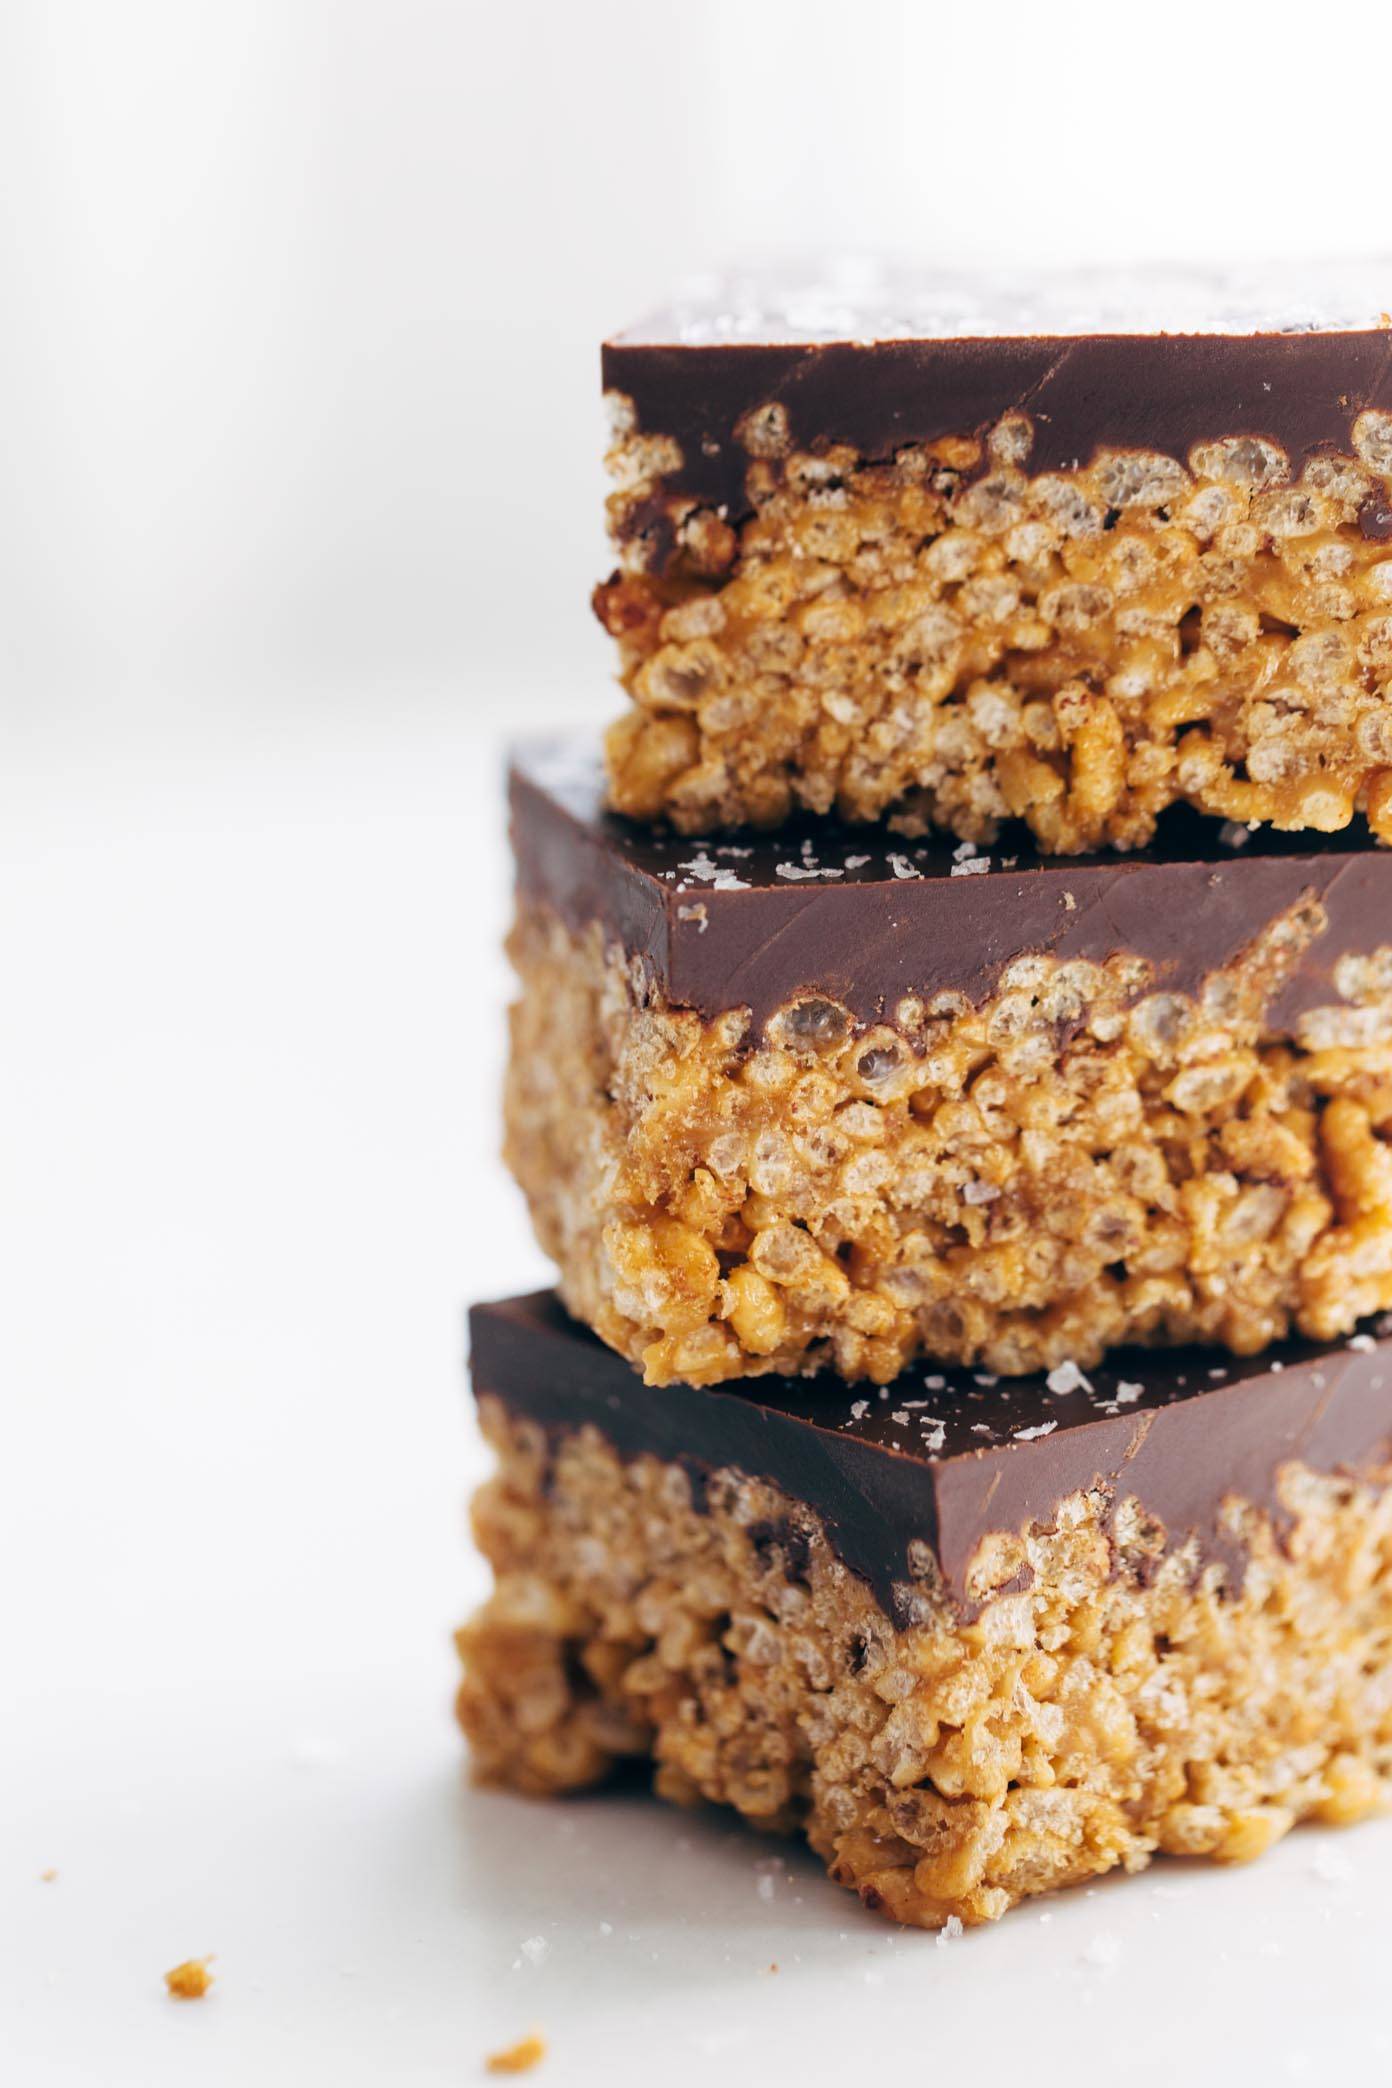 Peanut butter rice krispie bars stacked on each other.